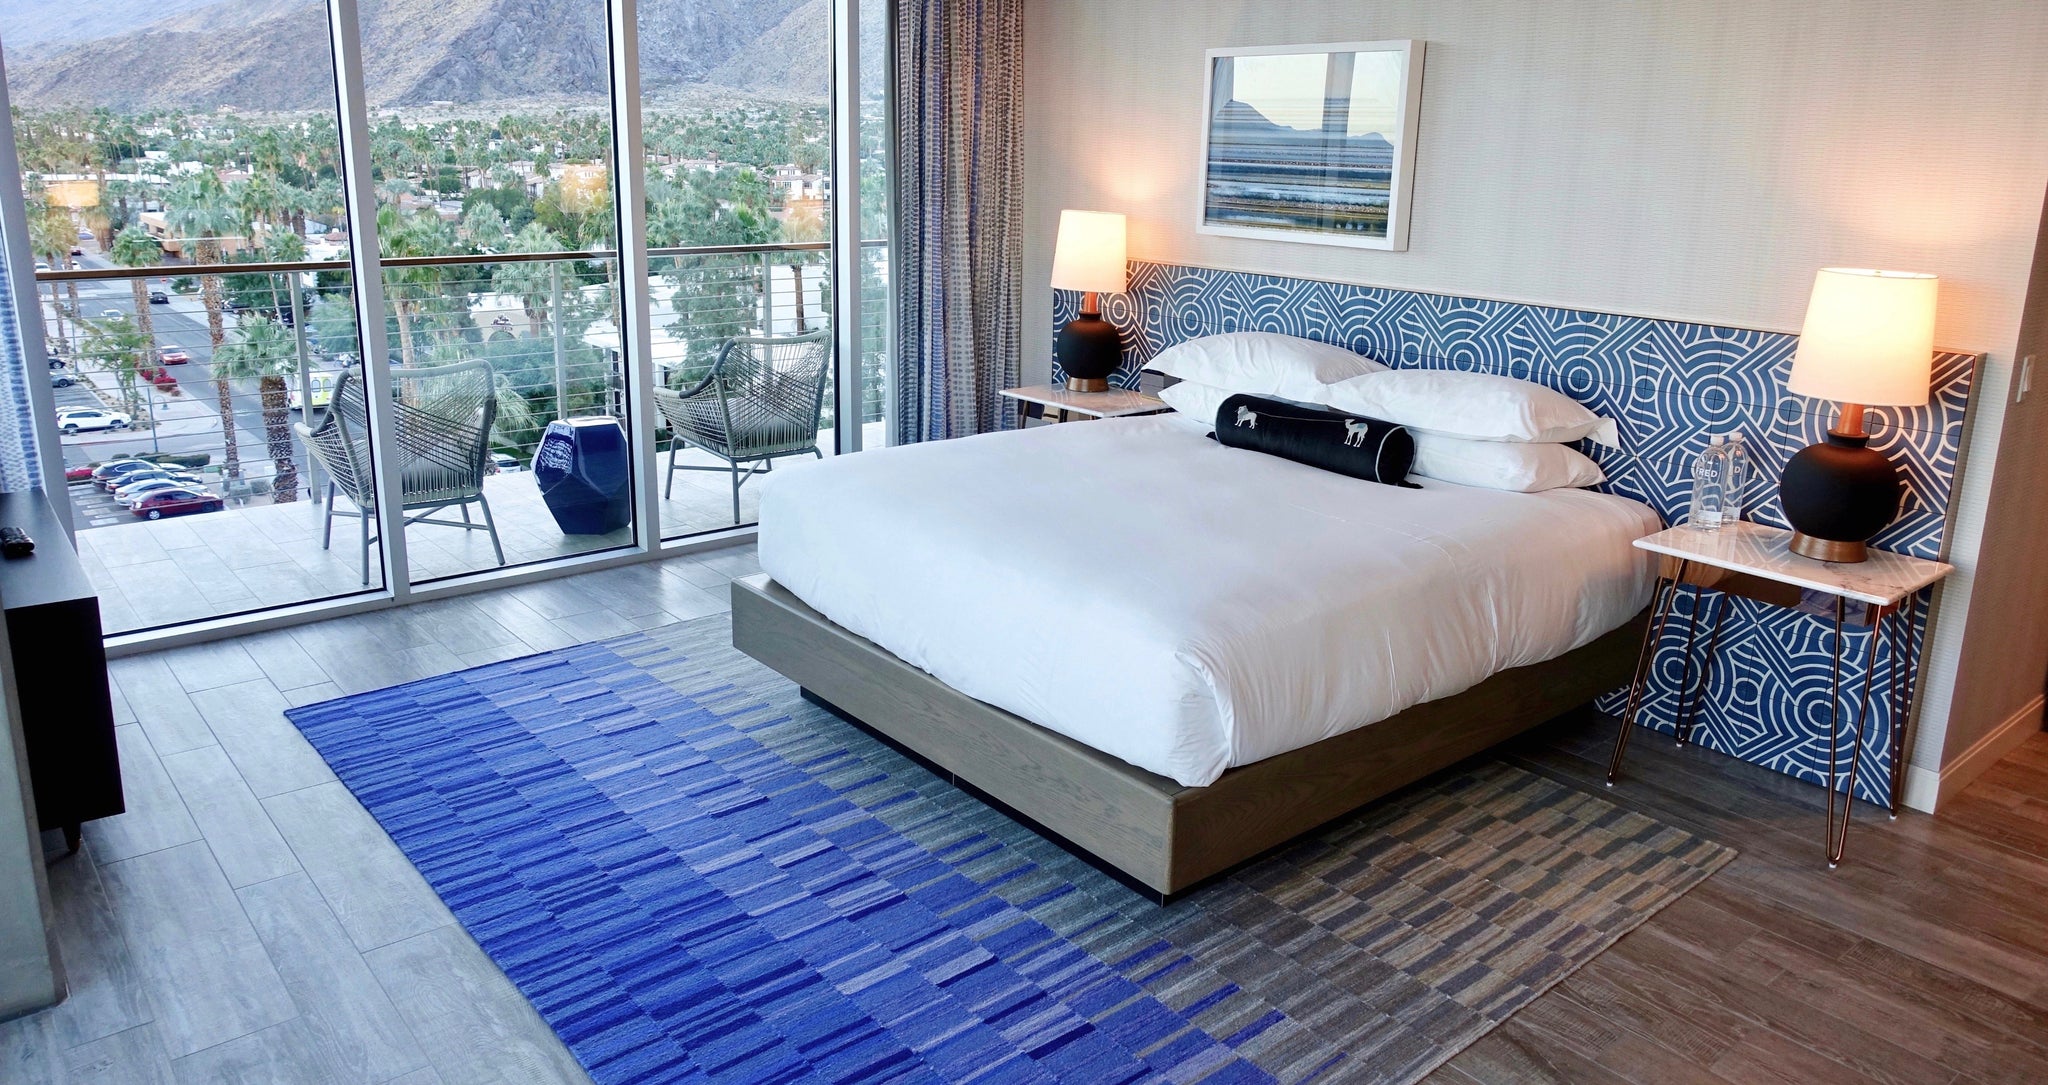 Desert Oasis: A First Look at the Kimpton Rowan Palm Springs Hotel ...